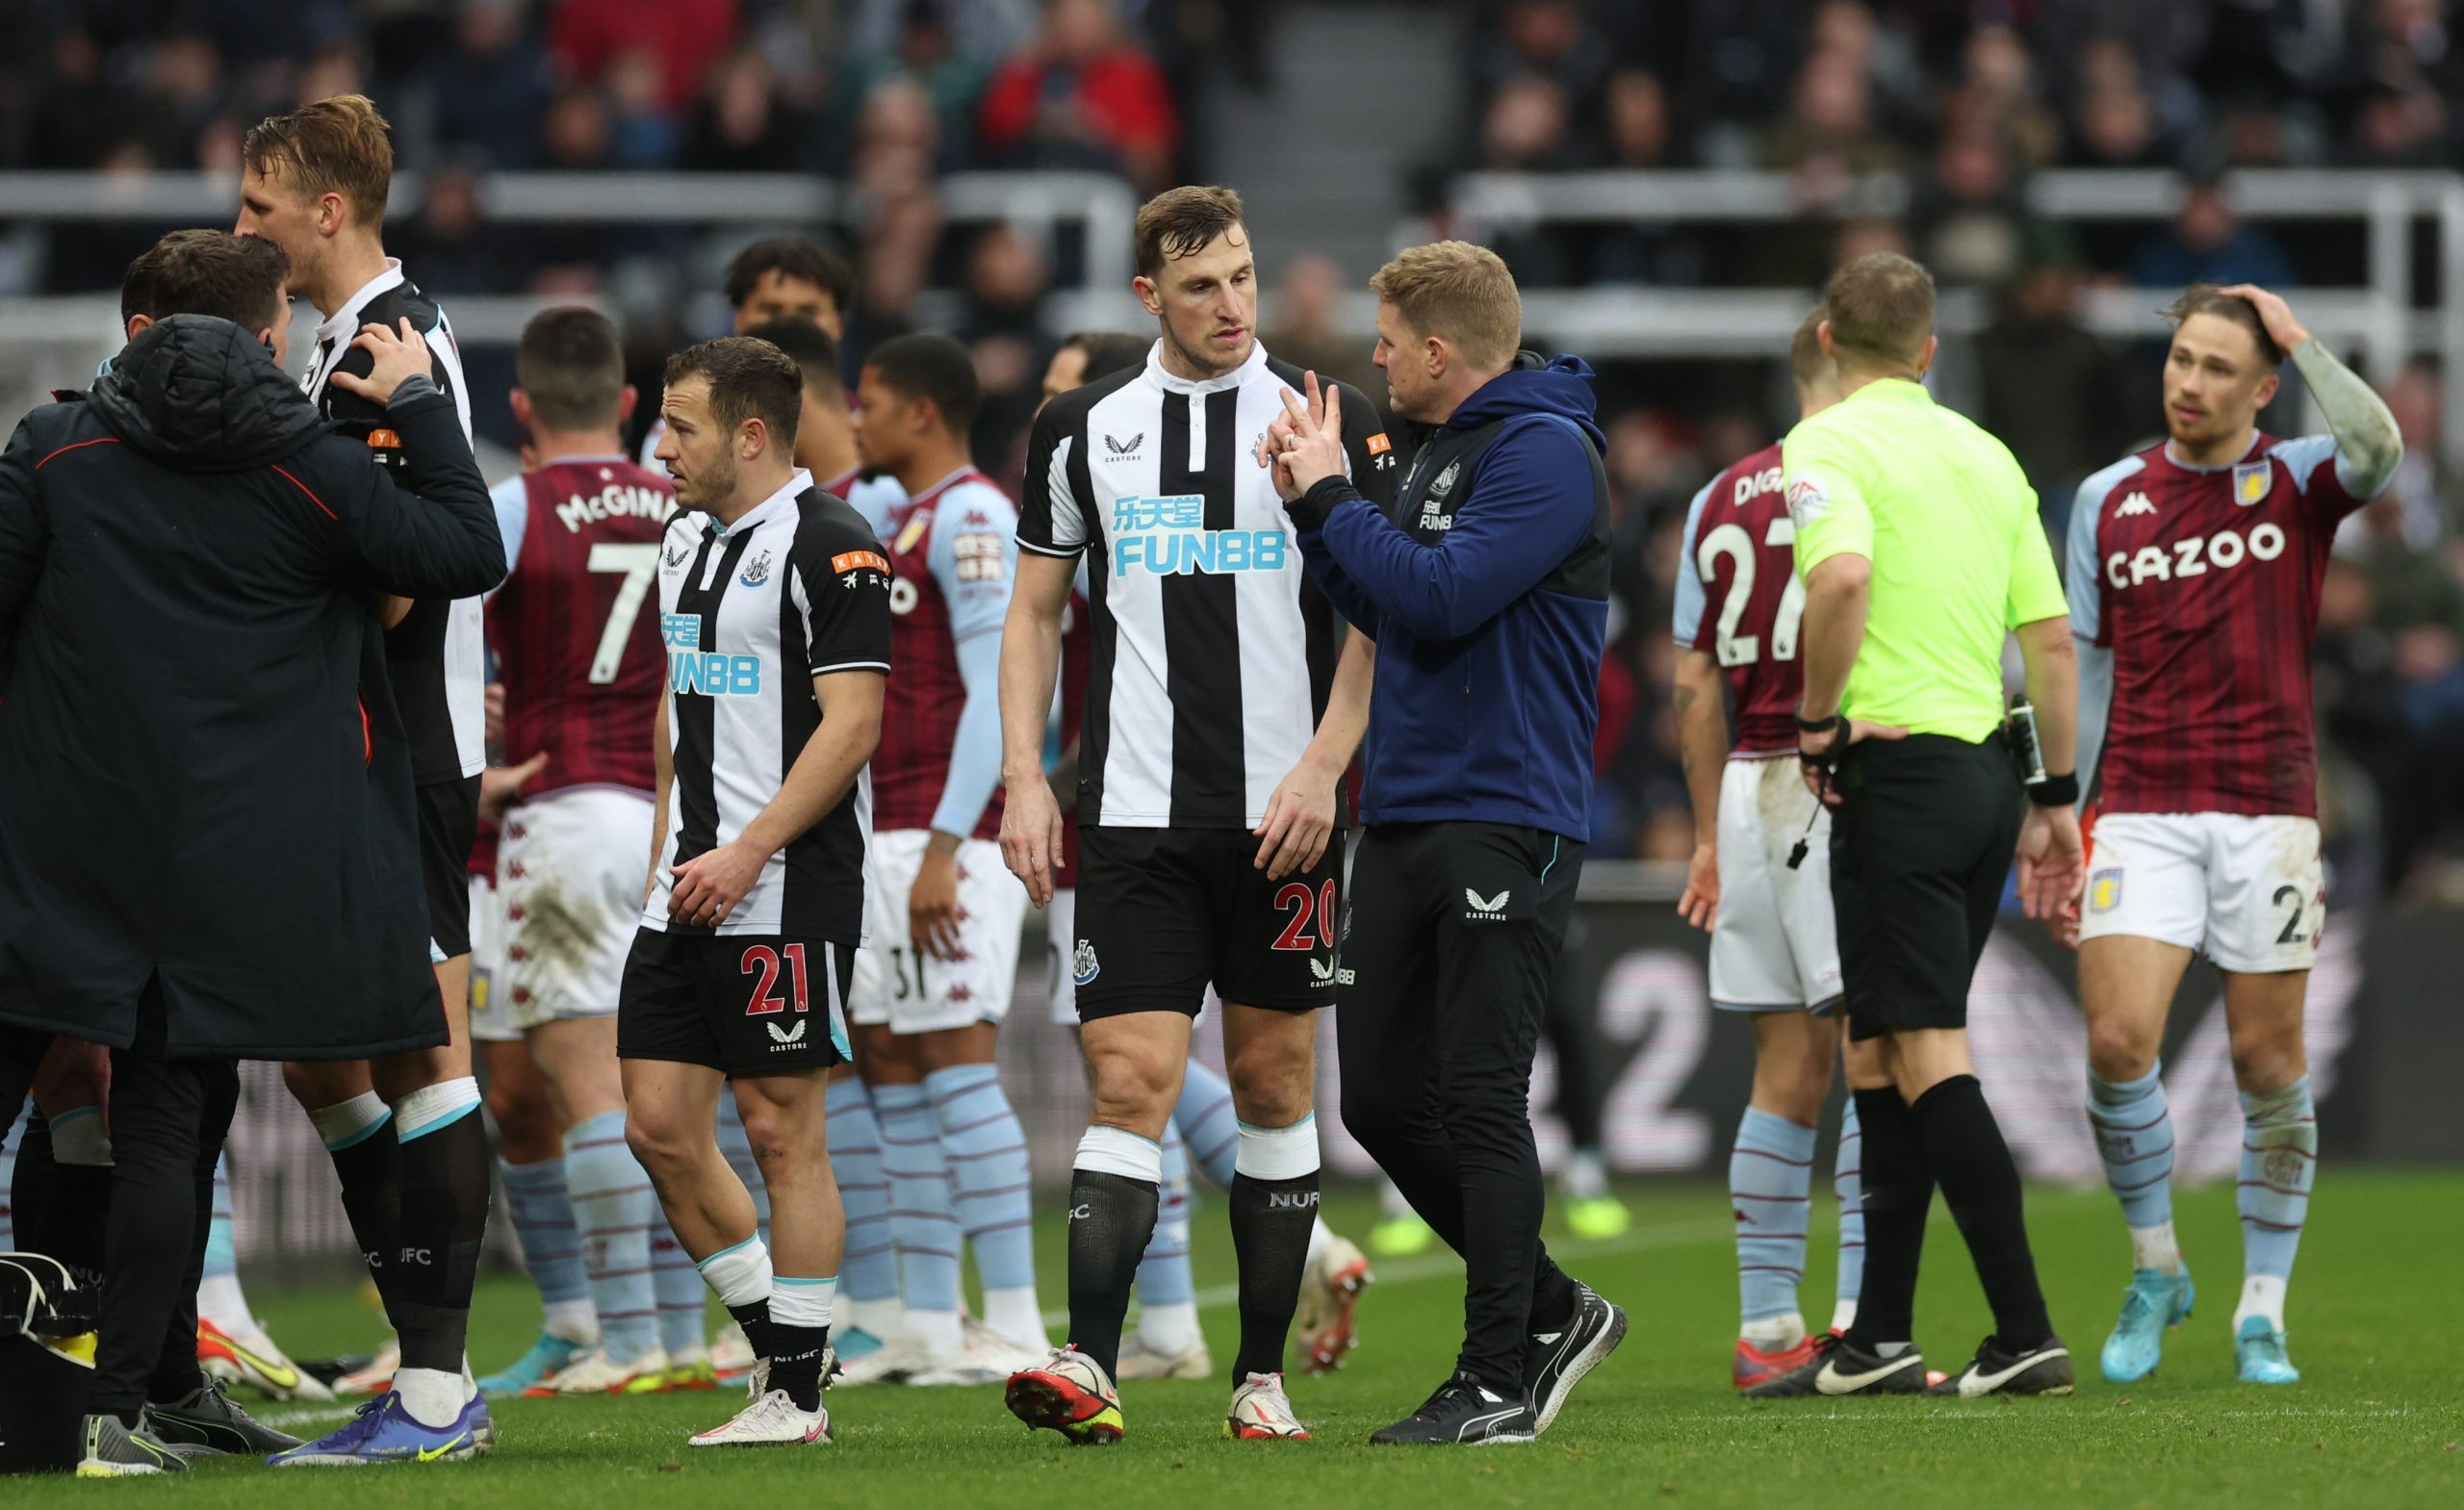 Soccer Football - Premier League - Newcastle United v Aston Villa - St James' Park, Newcastle, Britain - February 13, 2022 Newcastle United's Chris Wood speaks with Newcastle United manager Eddie Howe Action Images via Reuters/Lee Smith EDITORIAL USE ONLY. No use with unauthorized audio, video, data, fixture lists, club/league logos or 'live' services. Online in-match use limited to 75 images, no video emulation. No use in betting, games or single club /league/player publications.  Please contac